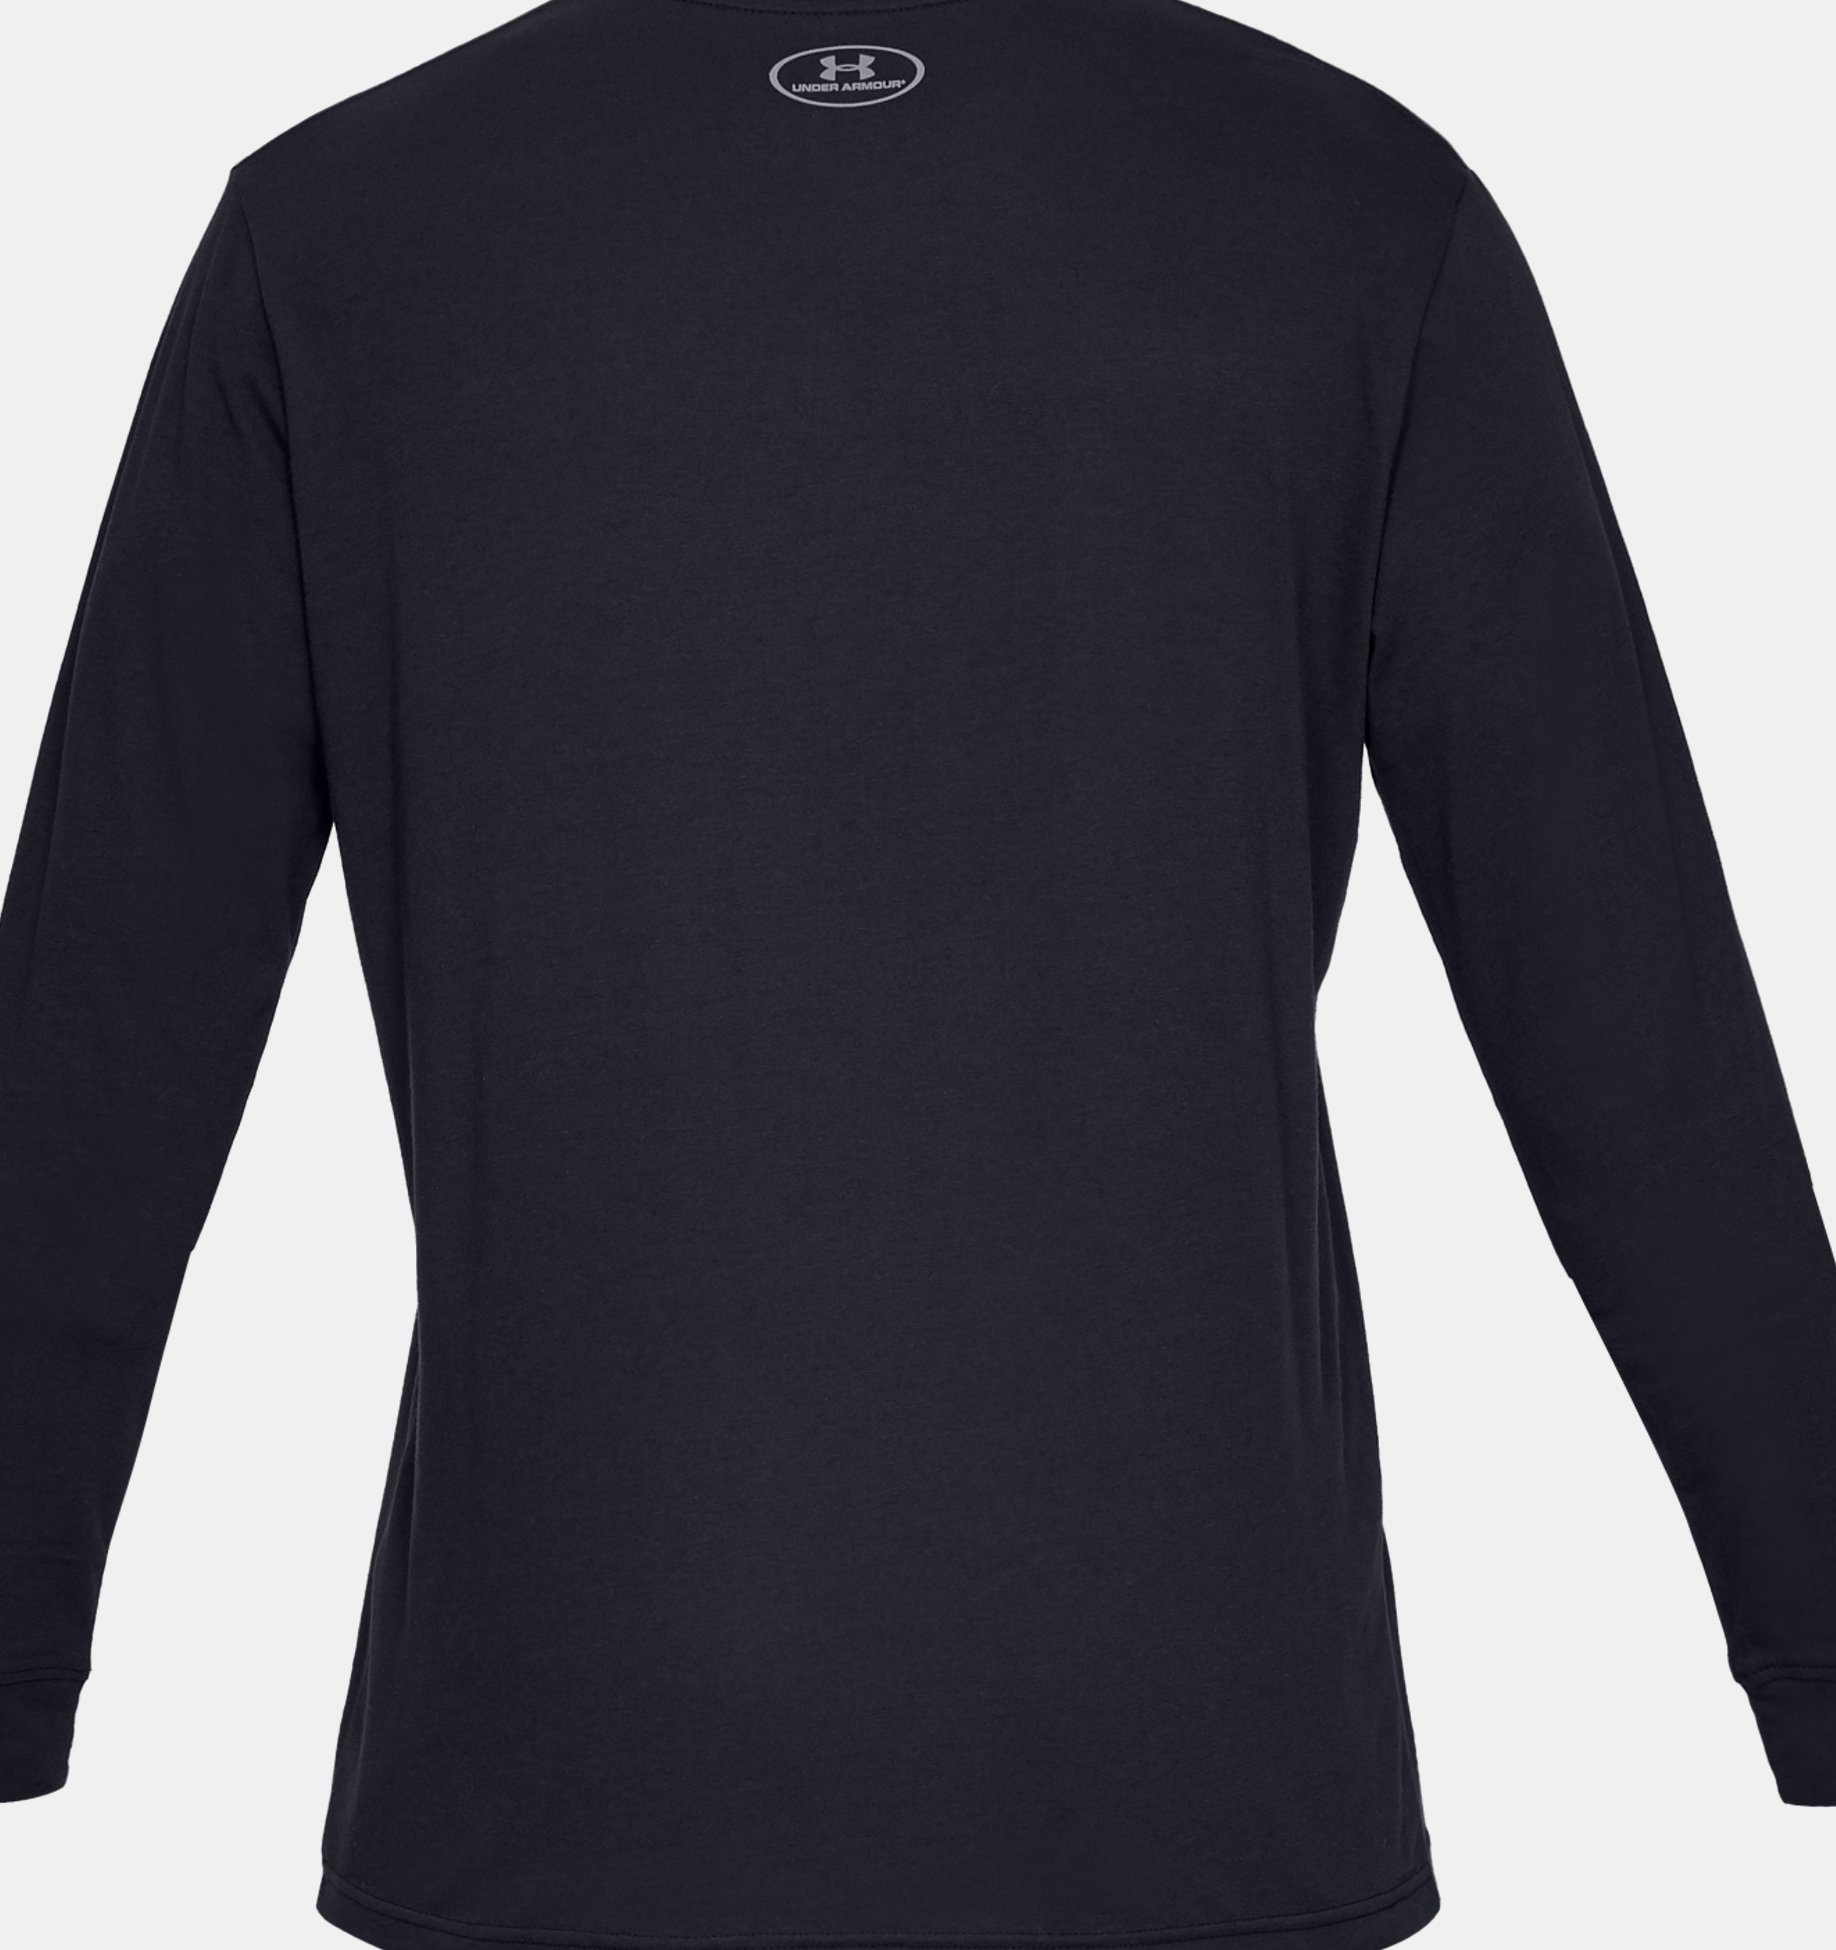 Under Armour Men's Sportstyle Left Chest Long Sleeve NWT 2021 